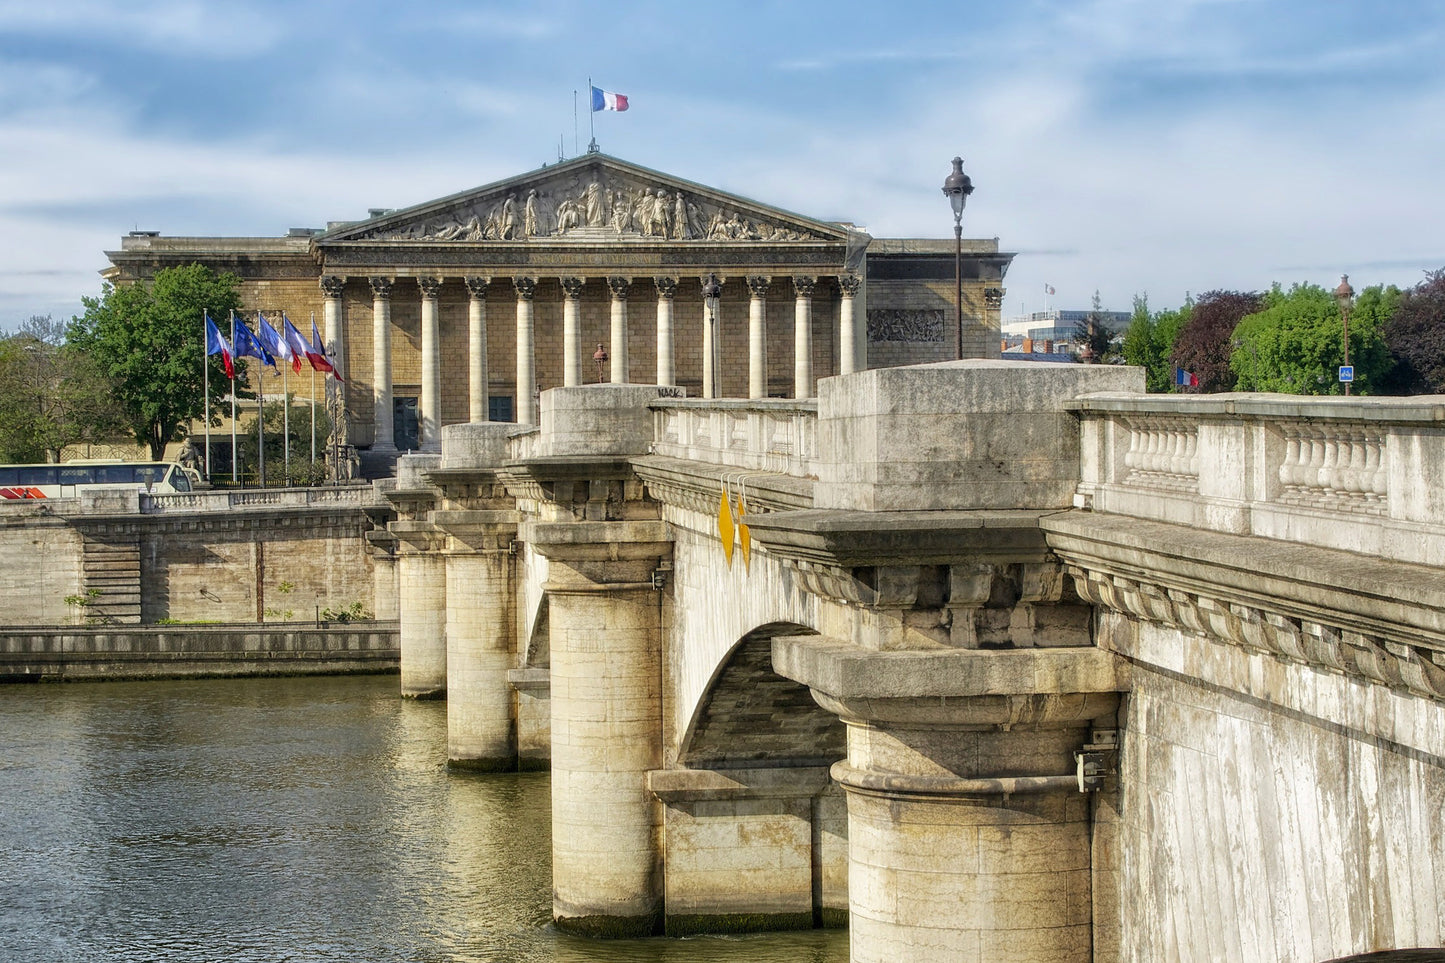 Paris Ultimate Experience: Small-Group Tour of 7 Iconic Attractions - Limited to 7 Participants